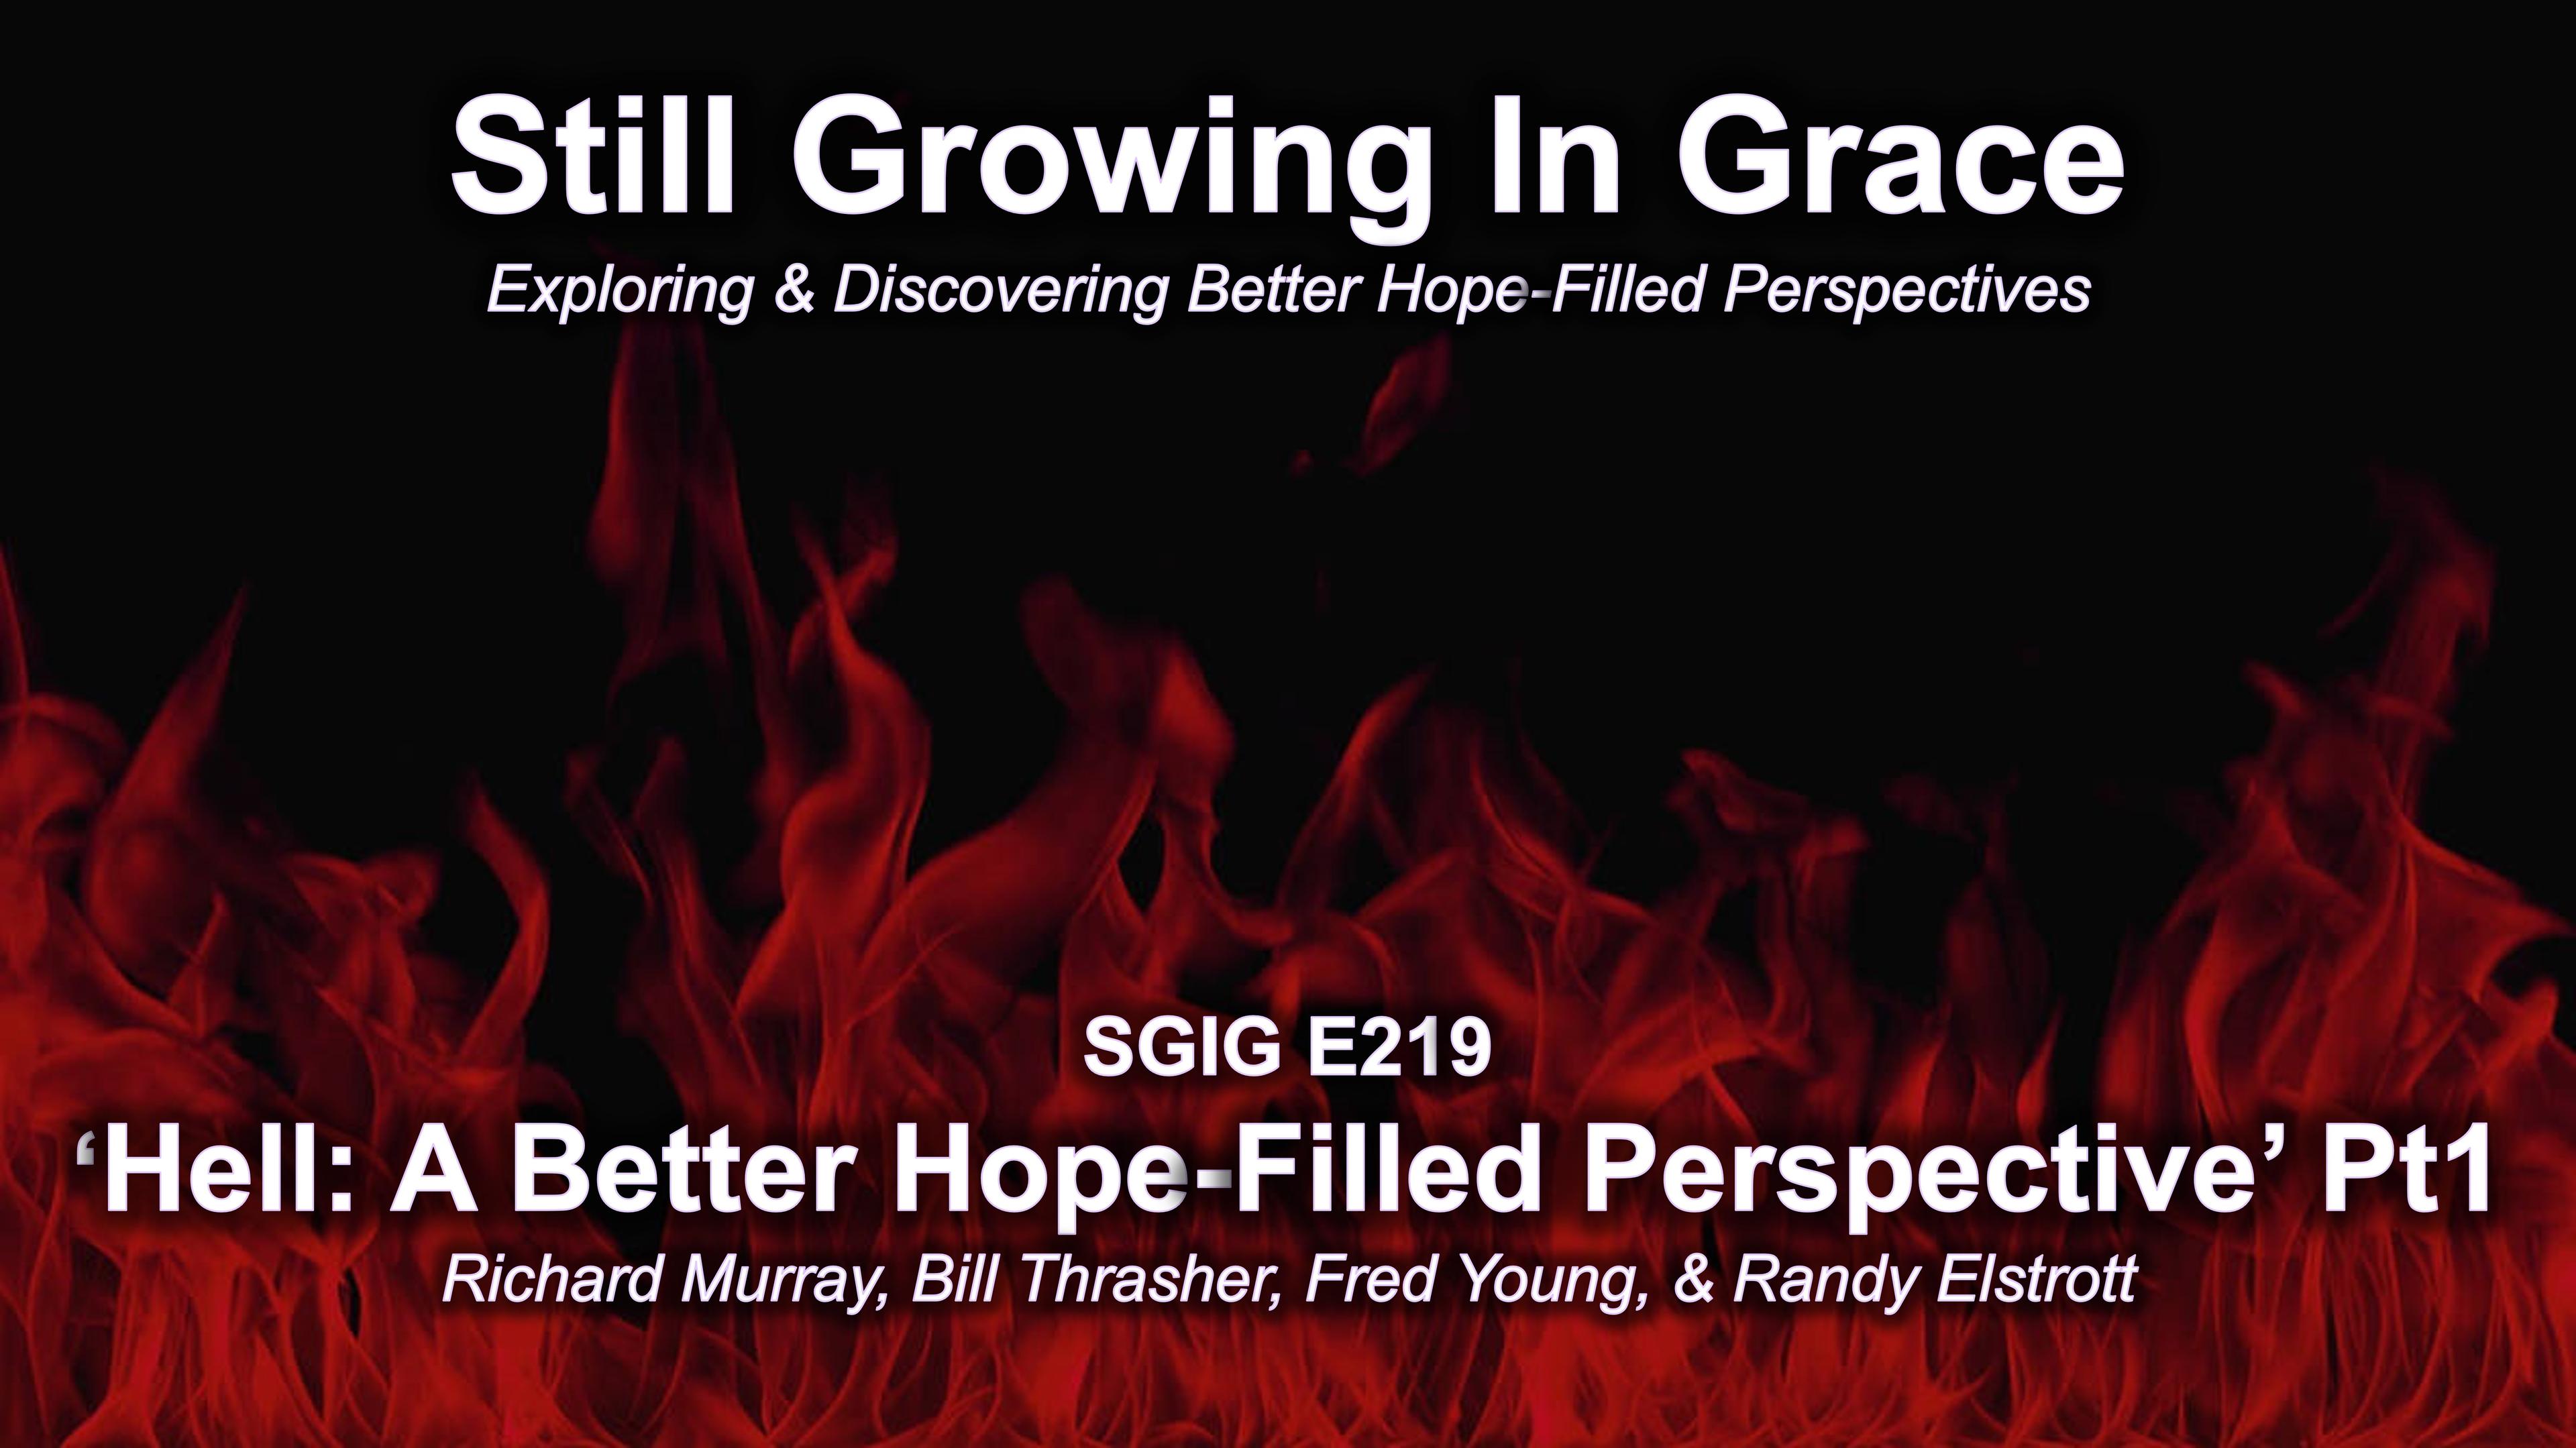 SGIG E219 Hell: A Better Hope-Filled Perspective Pt 1 [A Gentle Introduction]